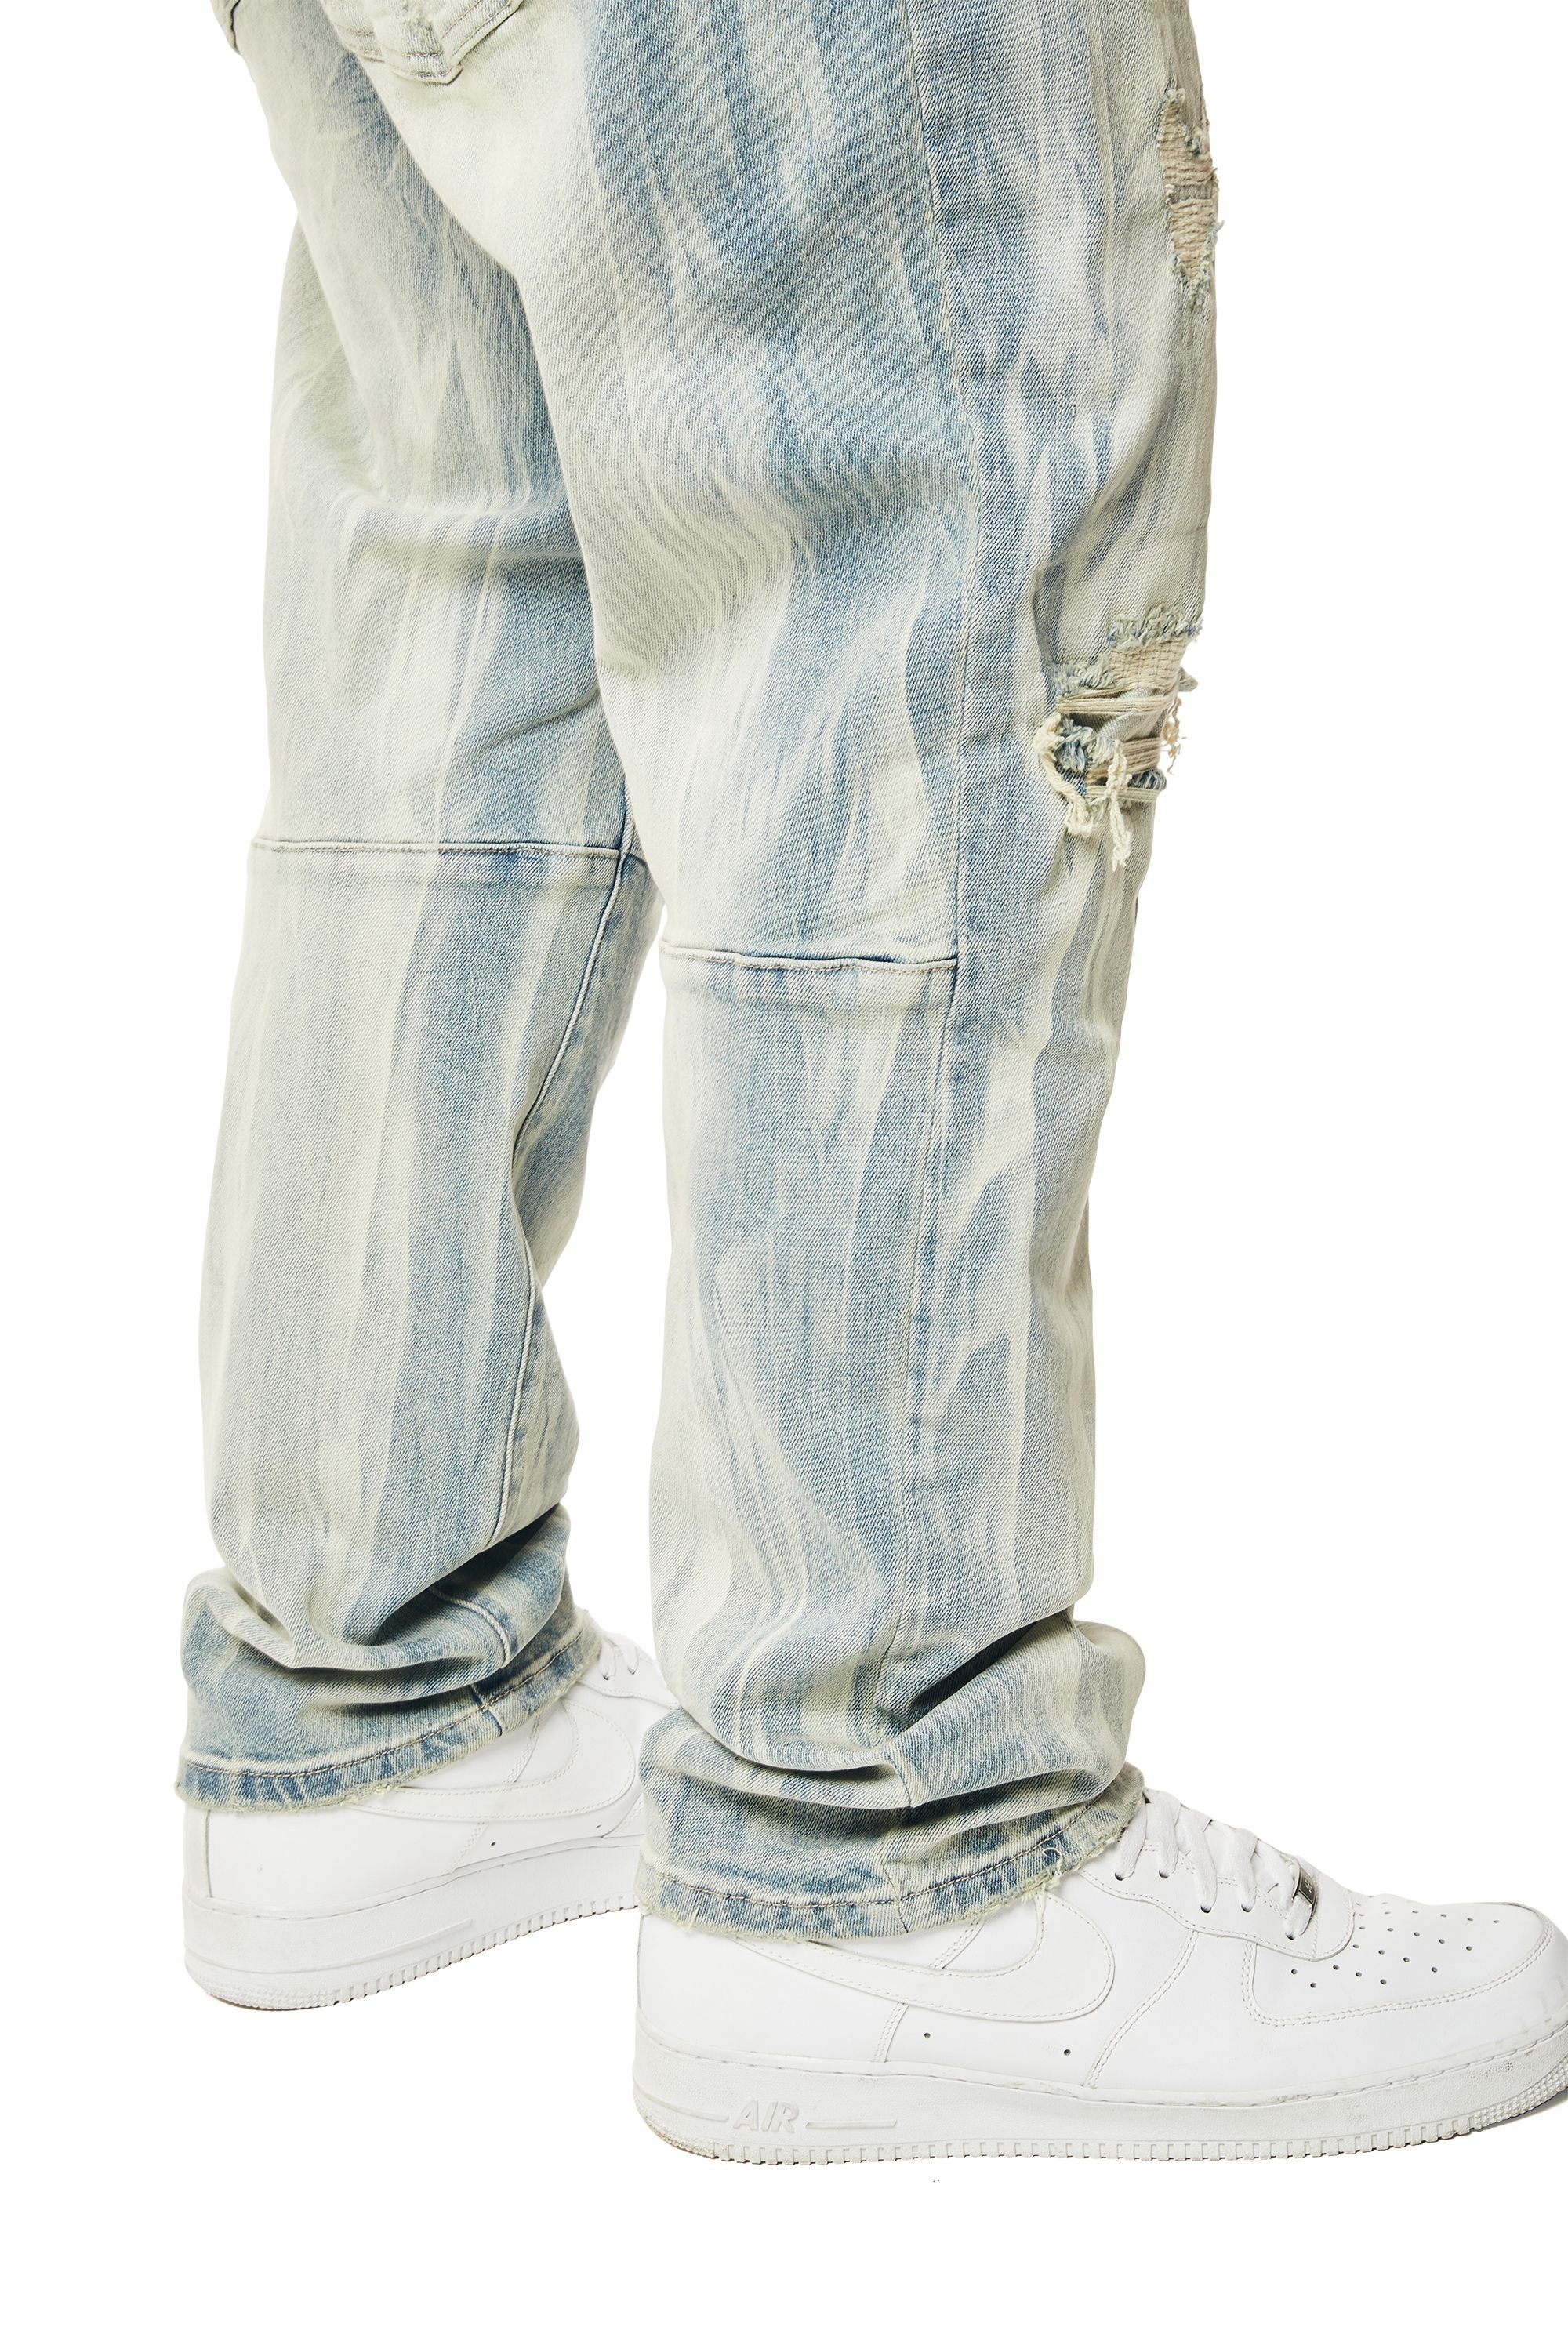 Big and Tall - Rooting Effect Denim Jeans - Seville Blue